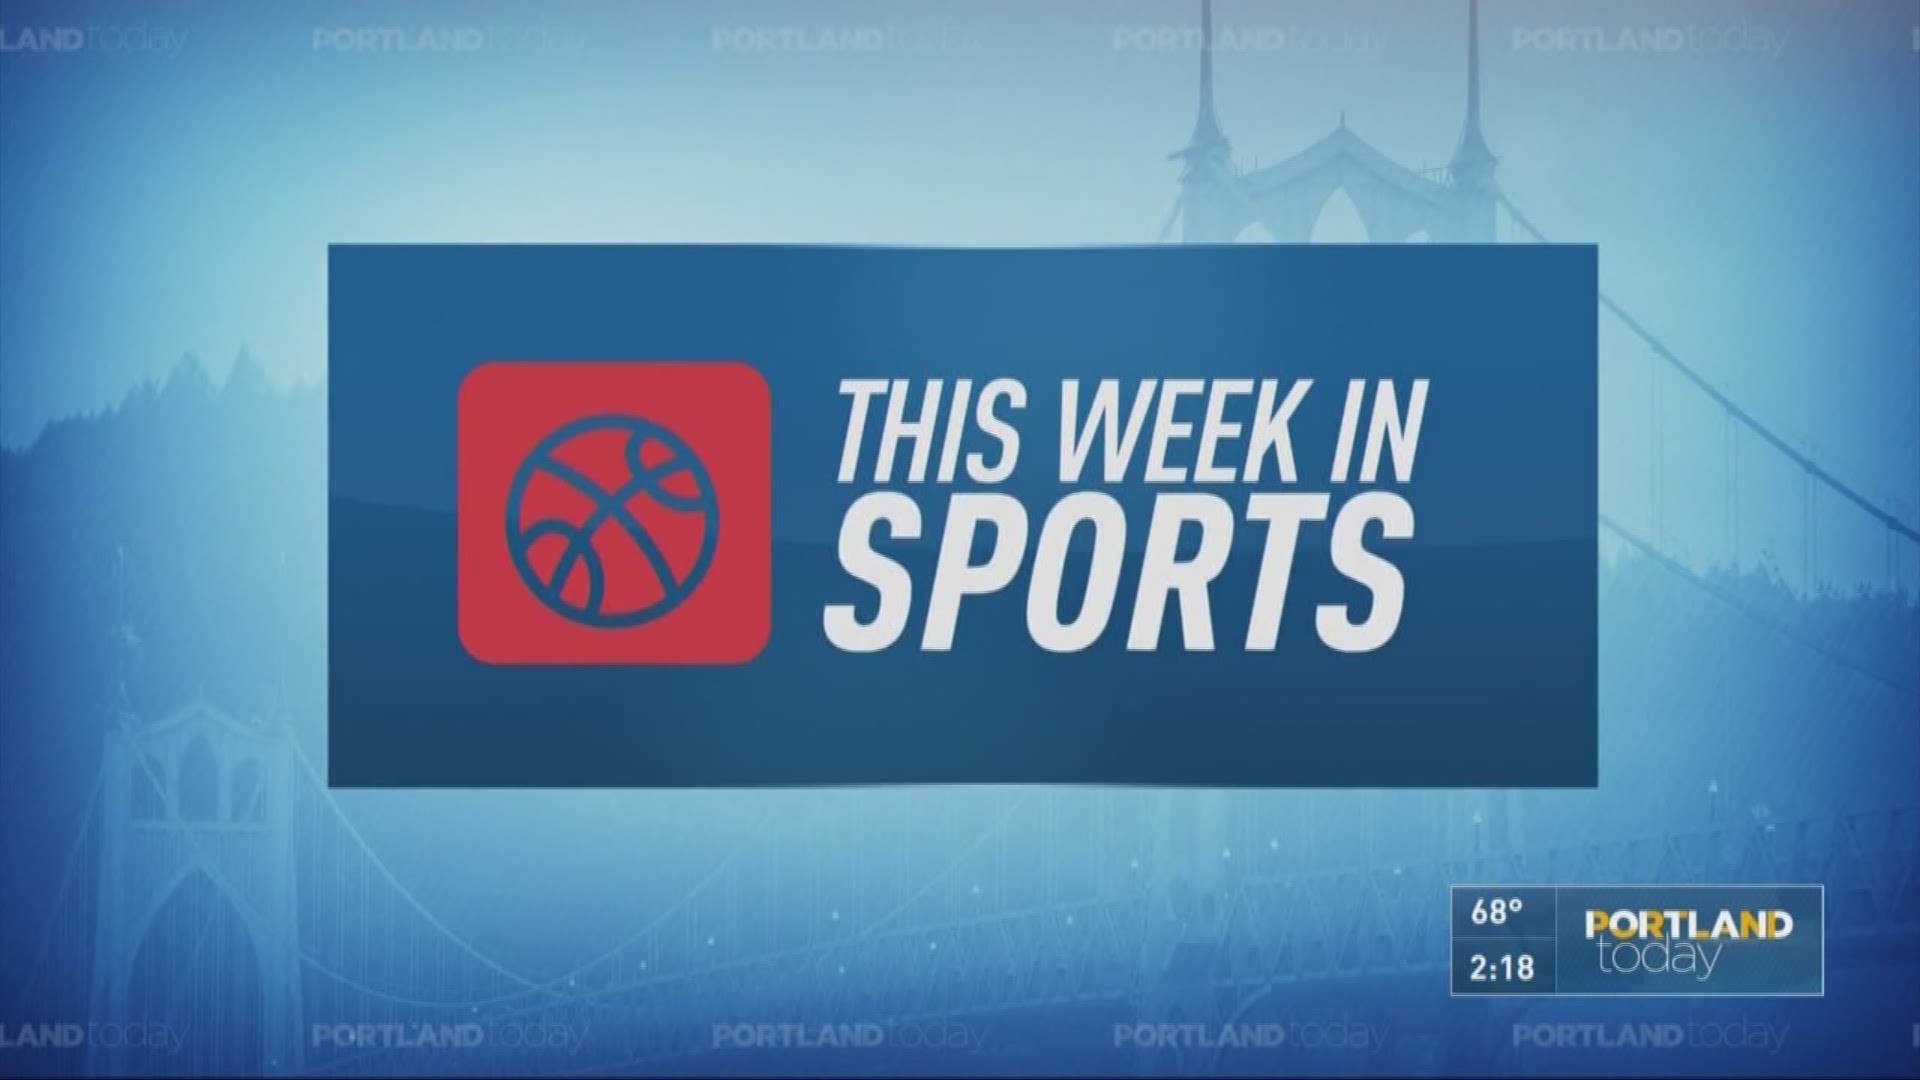 This week in sports